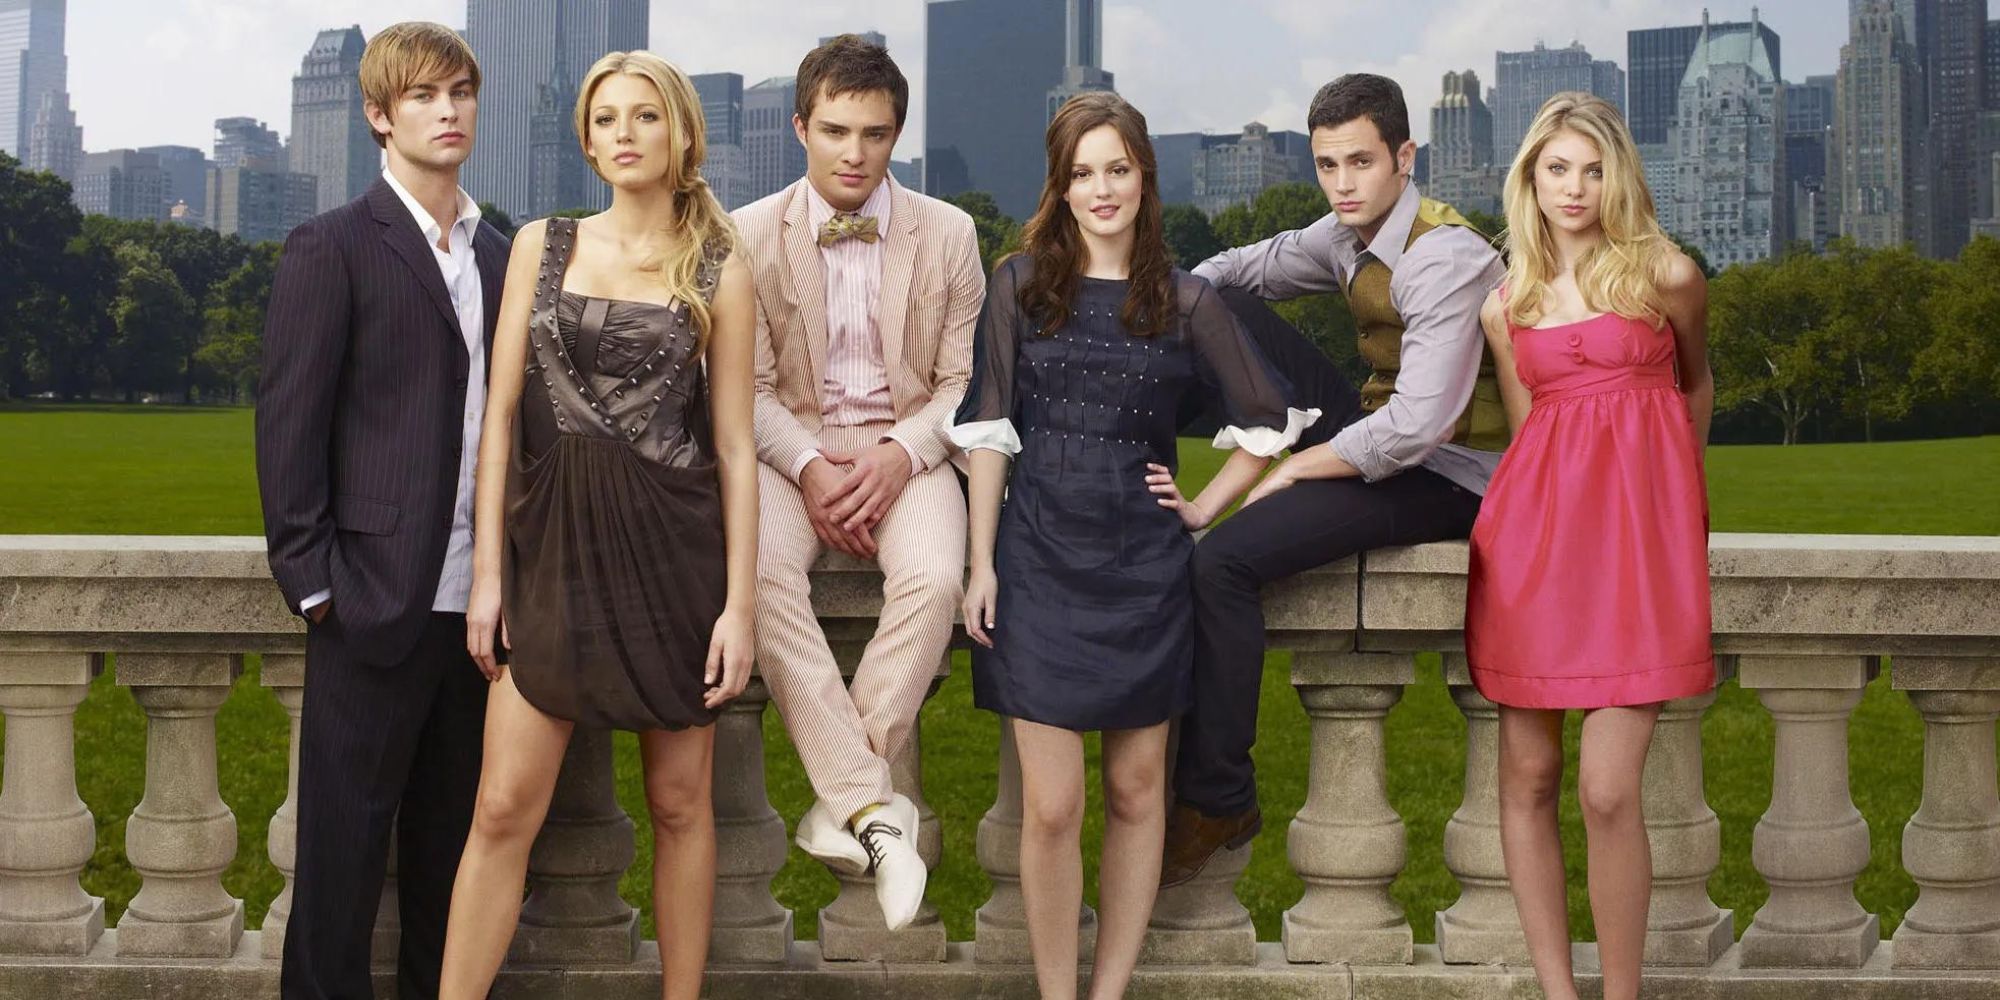 The cast of Gossip Girl standing together